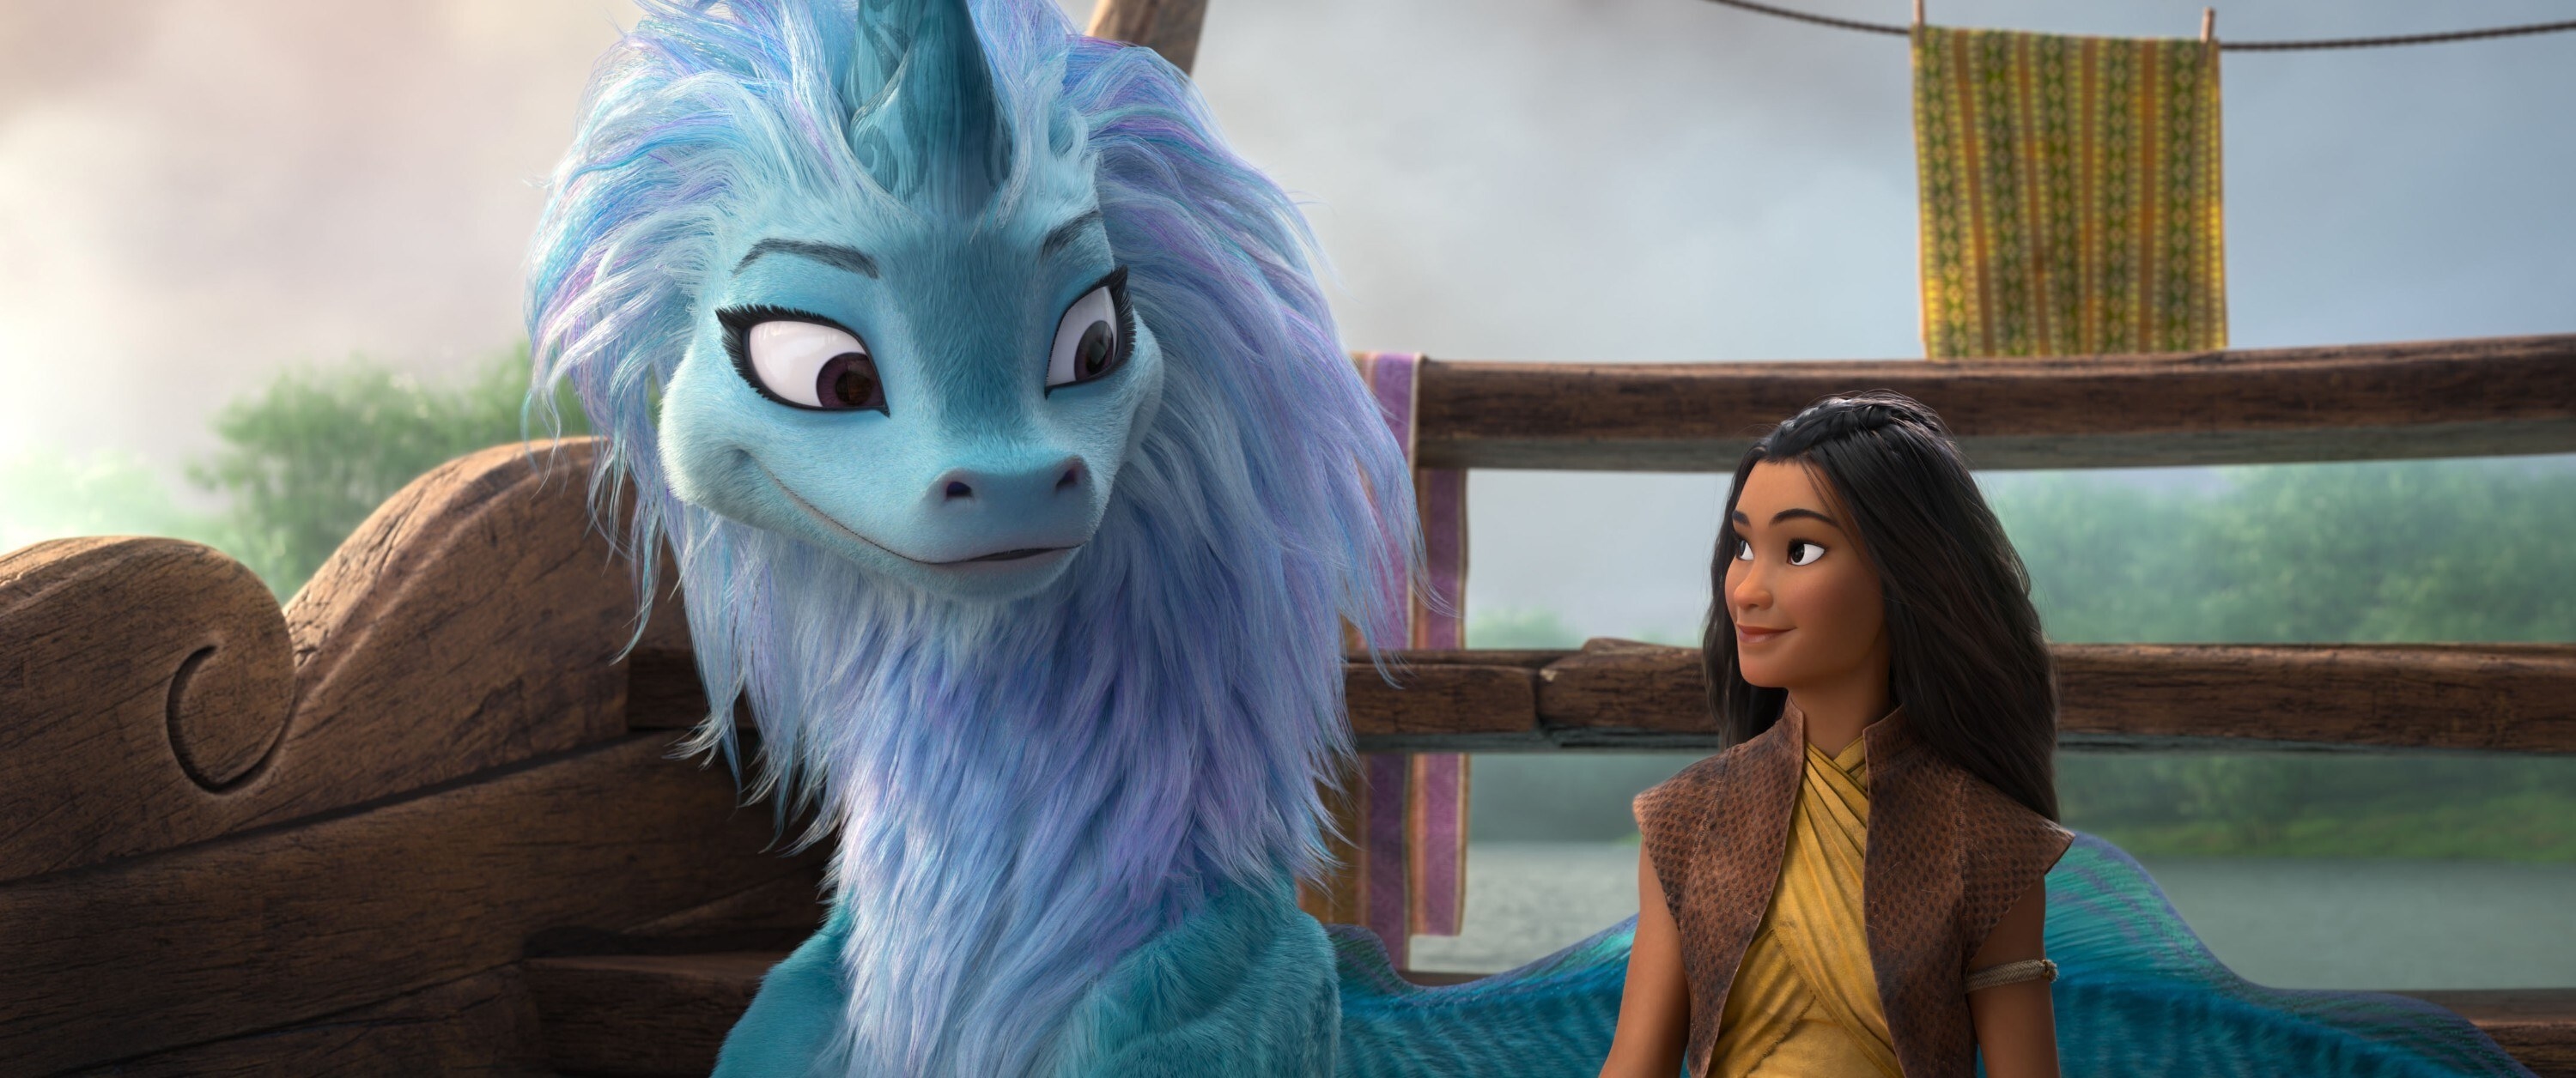 Animation: a Southeast Asian girl smiles at a blue and purple dragon. The dragon smiles back